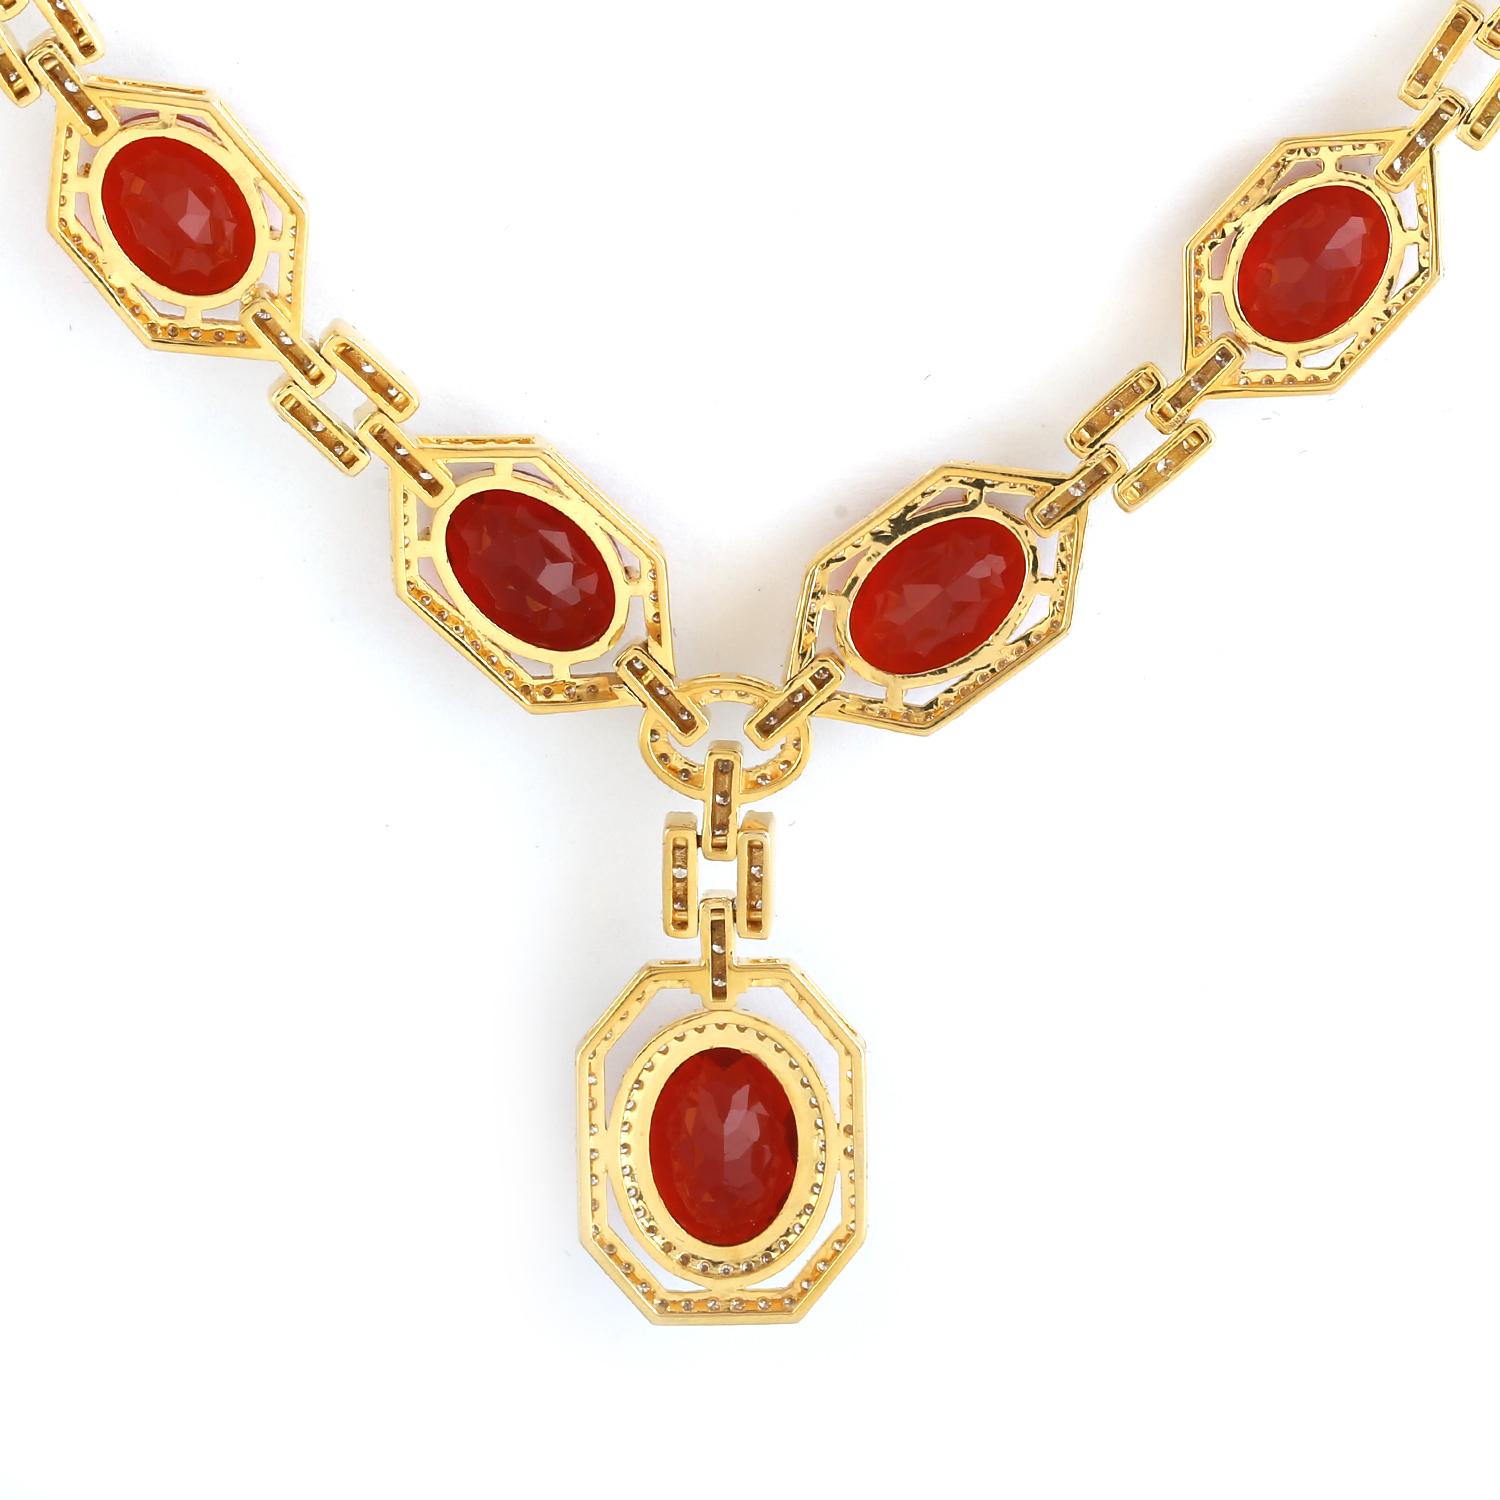 Artisan Oval Shaped Fire Opal Chain Necklace With Pave Diamonds In 18k Yellow Gold For Sale